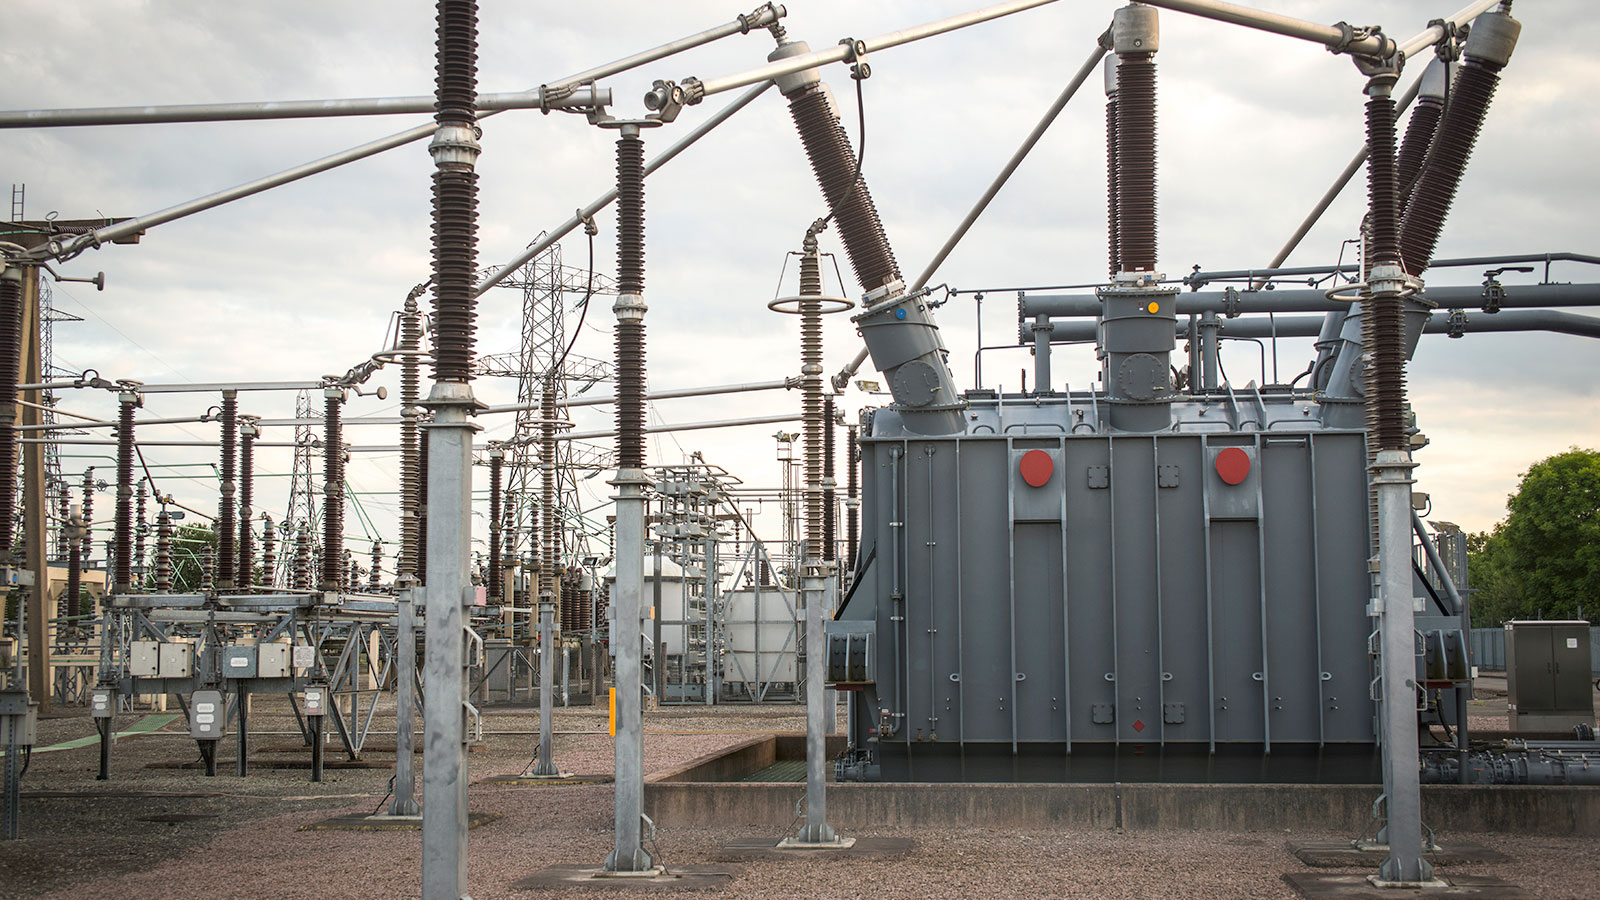 National Grid Electricity Distribution has recently announced the expansion of its energy flexibility operations to encompass an additional 1,426 sites within its low voltage (LV) distribution network